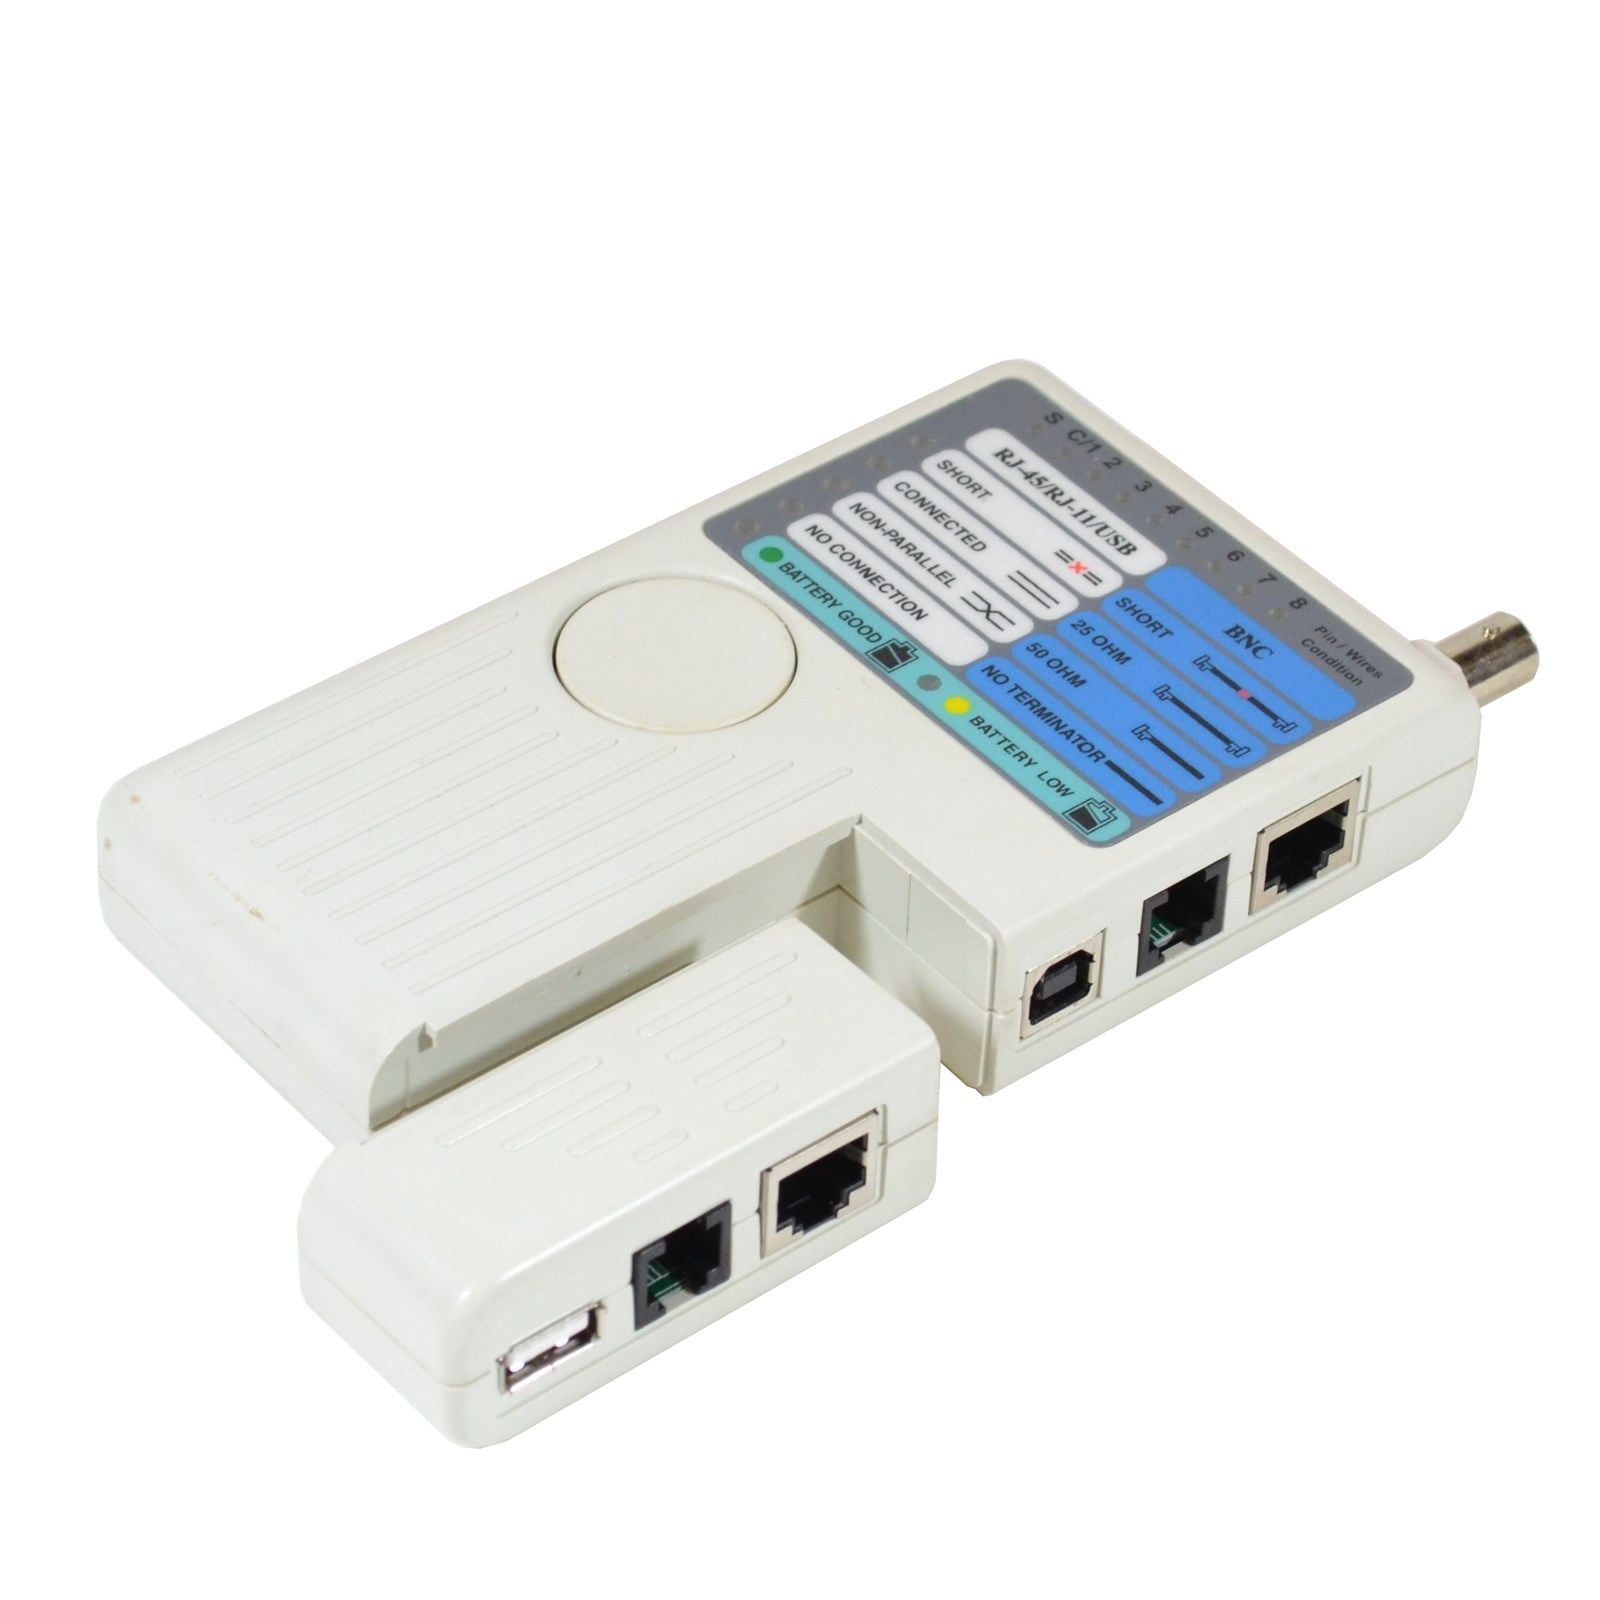 Plyisty Phone Line Tester RJ45 Cable Tracker Network Cable Tester White Phone Cable Tester Fiber Optical Tool for Cable Collation for Network Maintenance Collation 